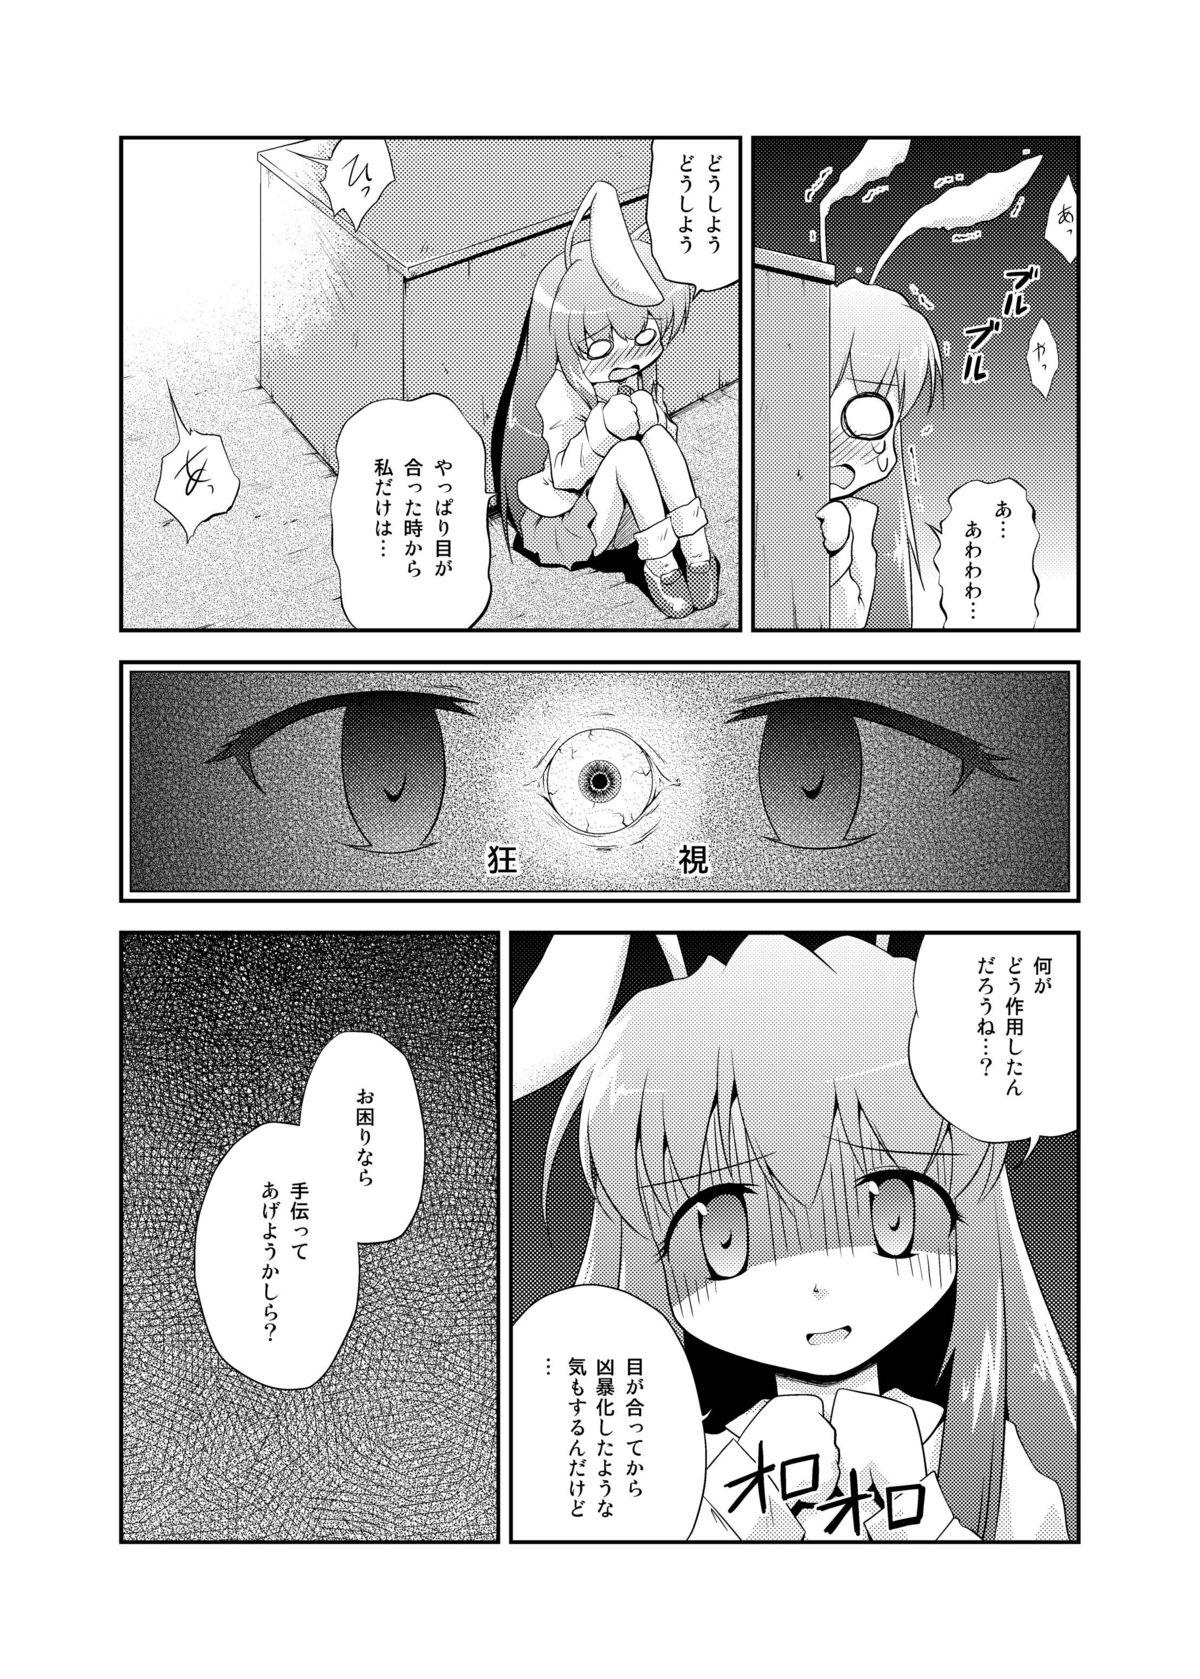 One DISARM CLOTHES - Touhou project Uniform - Page 13